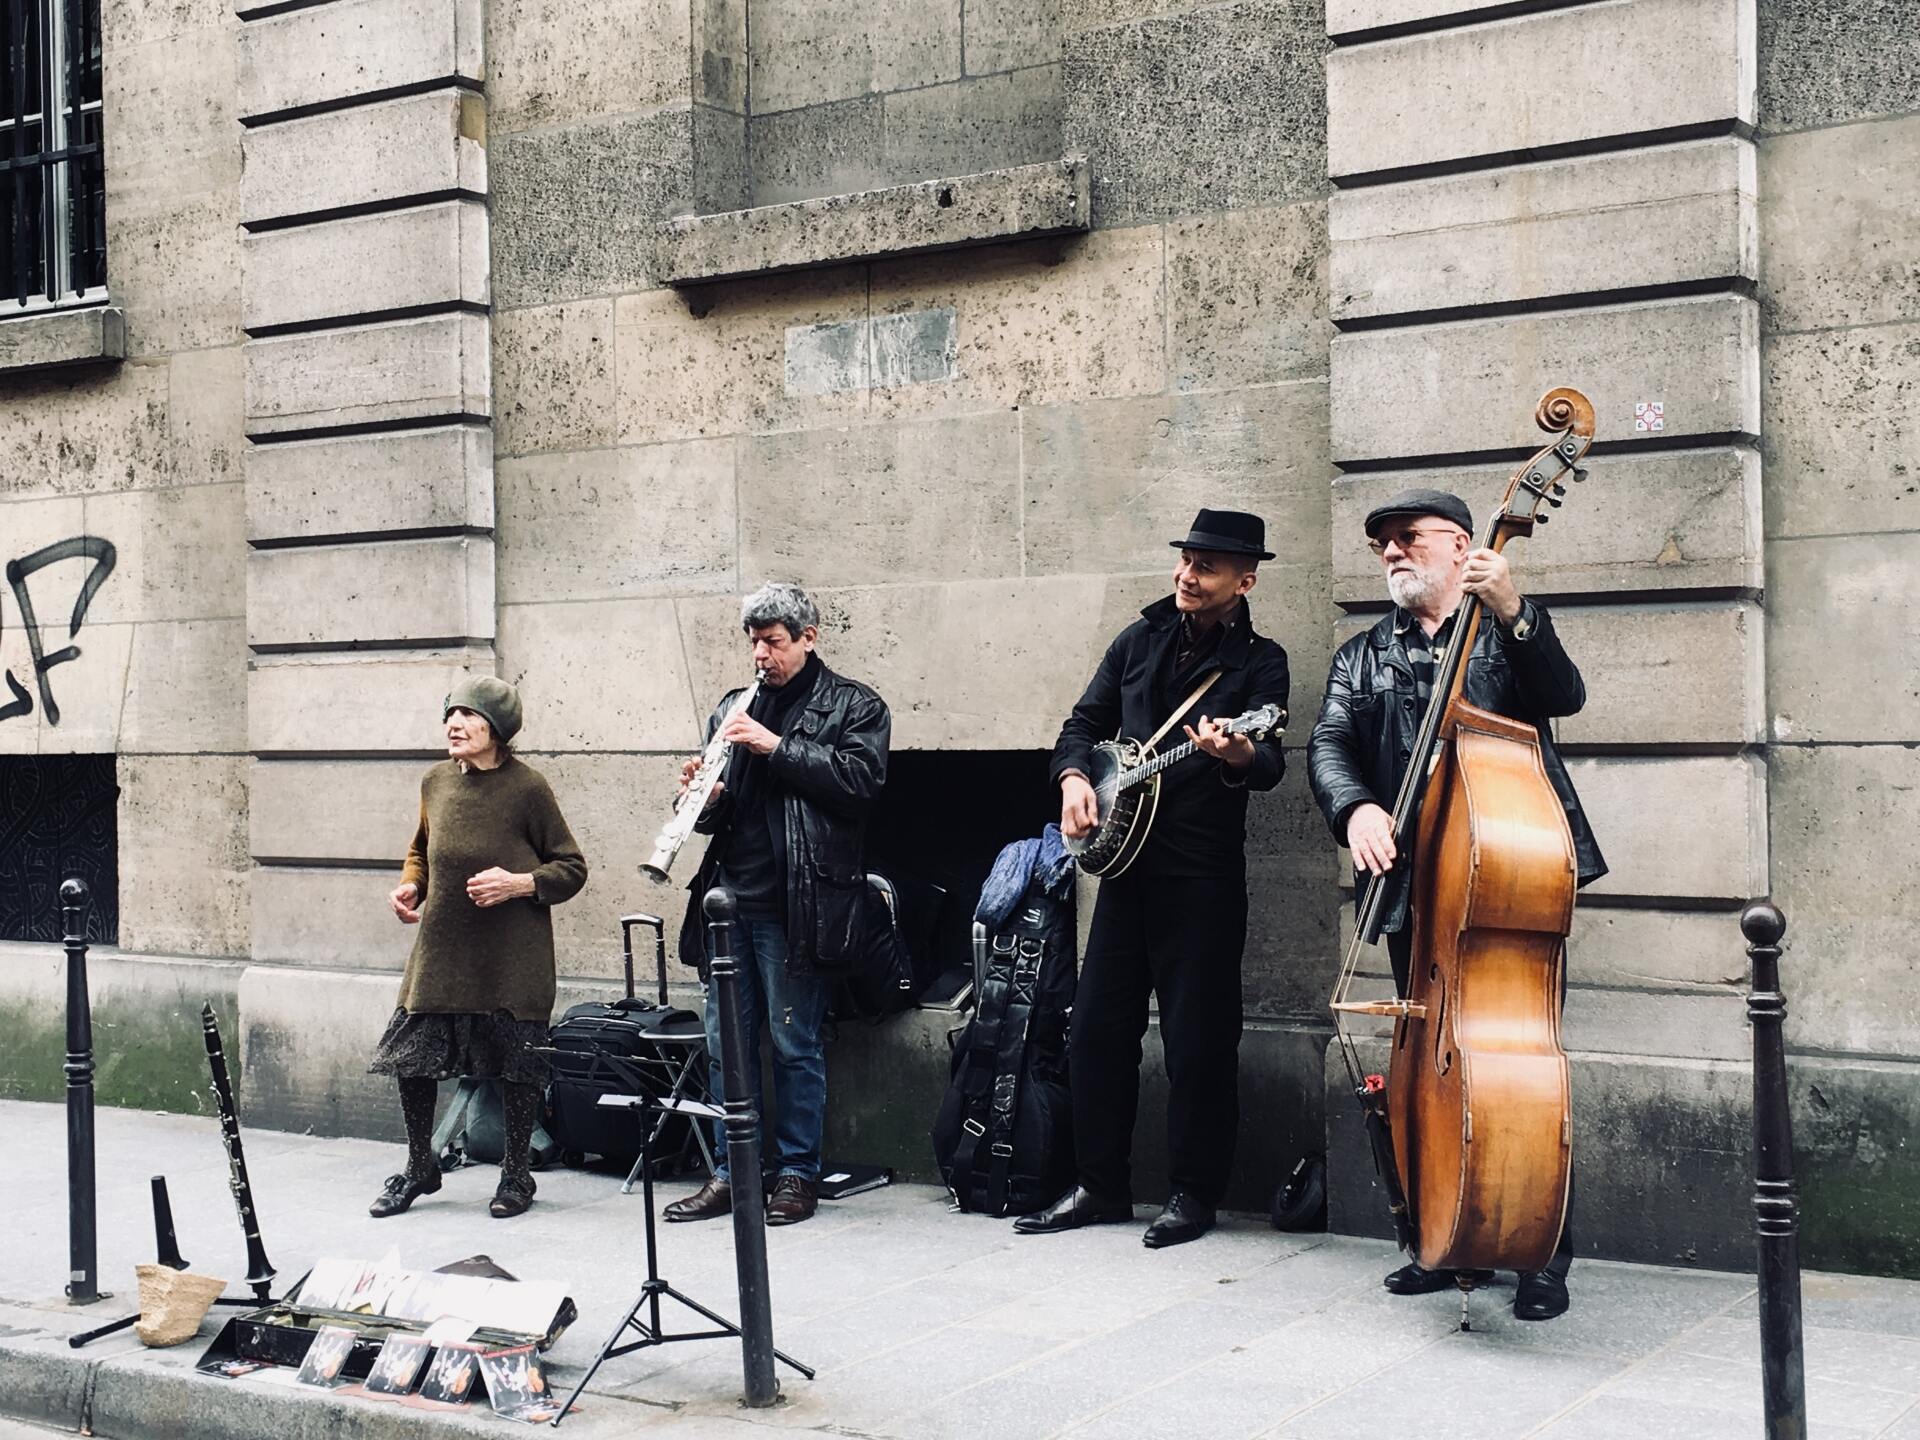 A group of musicians are playing on the sidewalk in front of a building